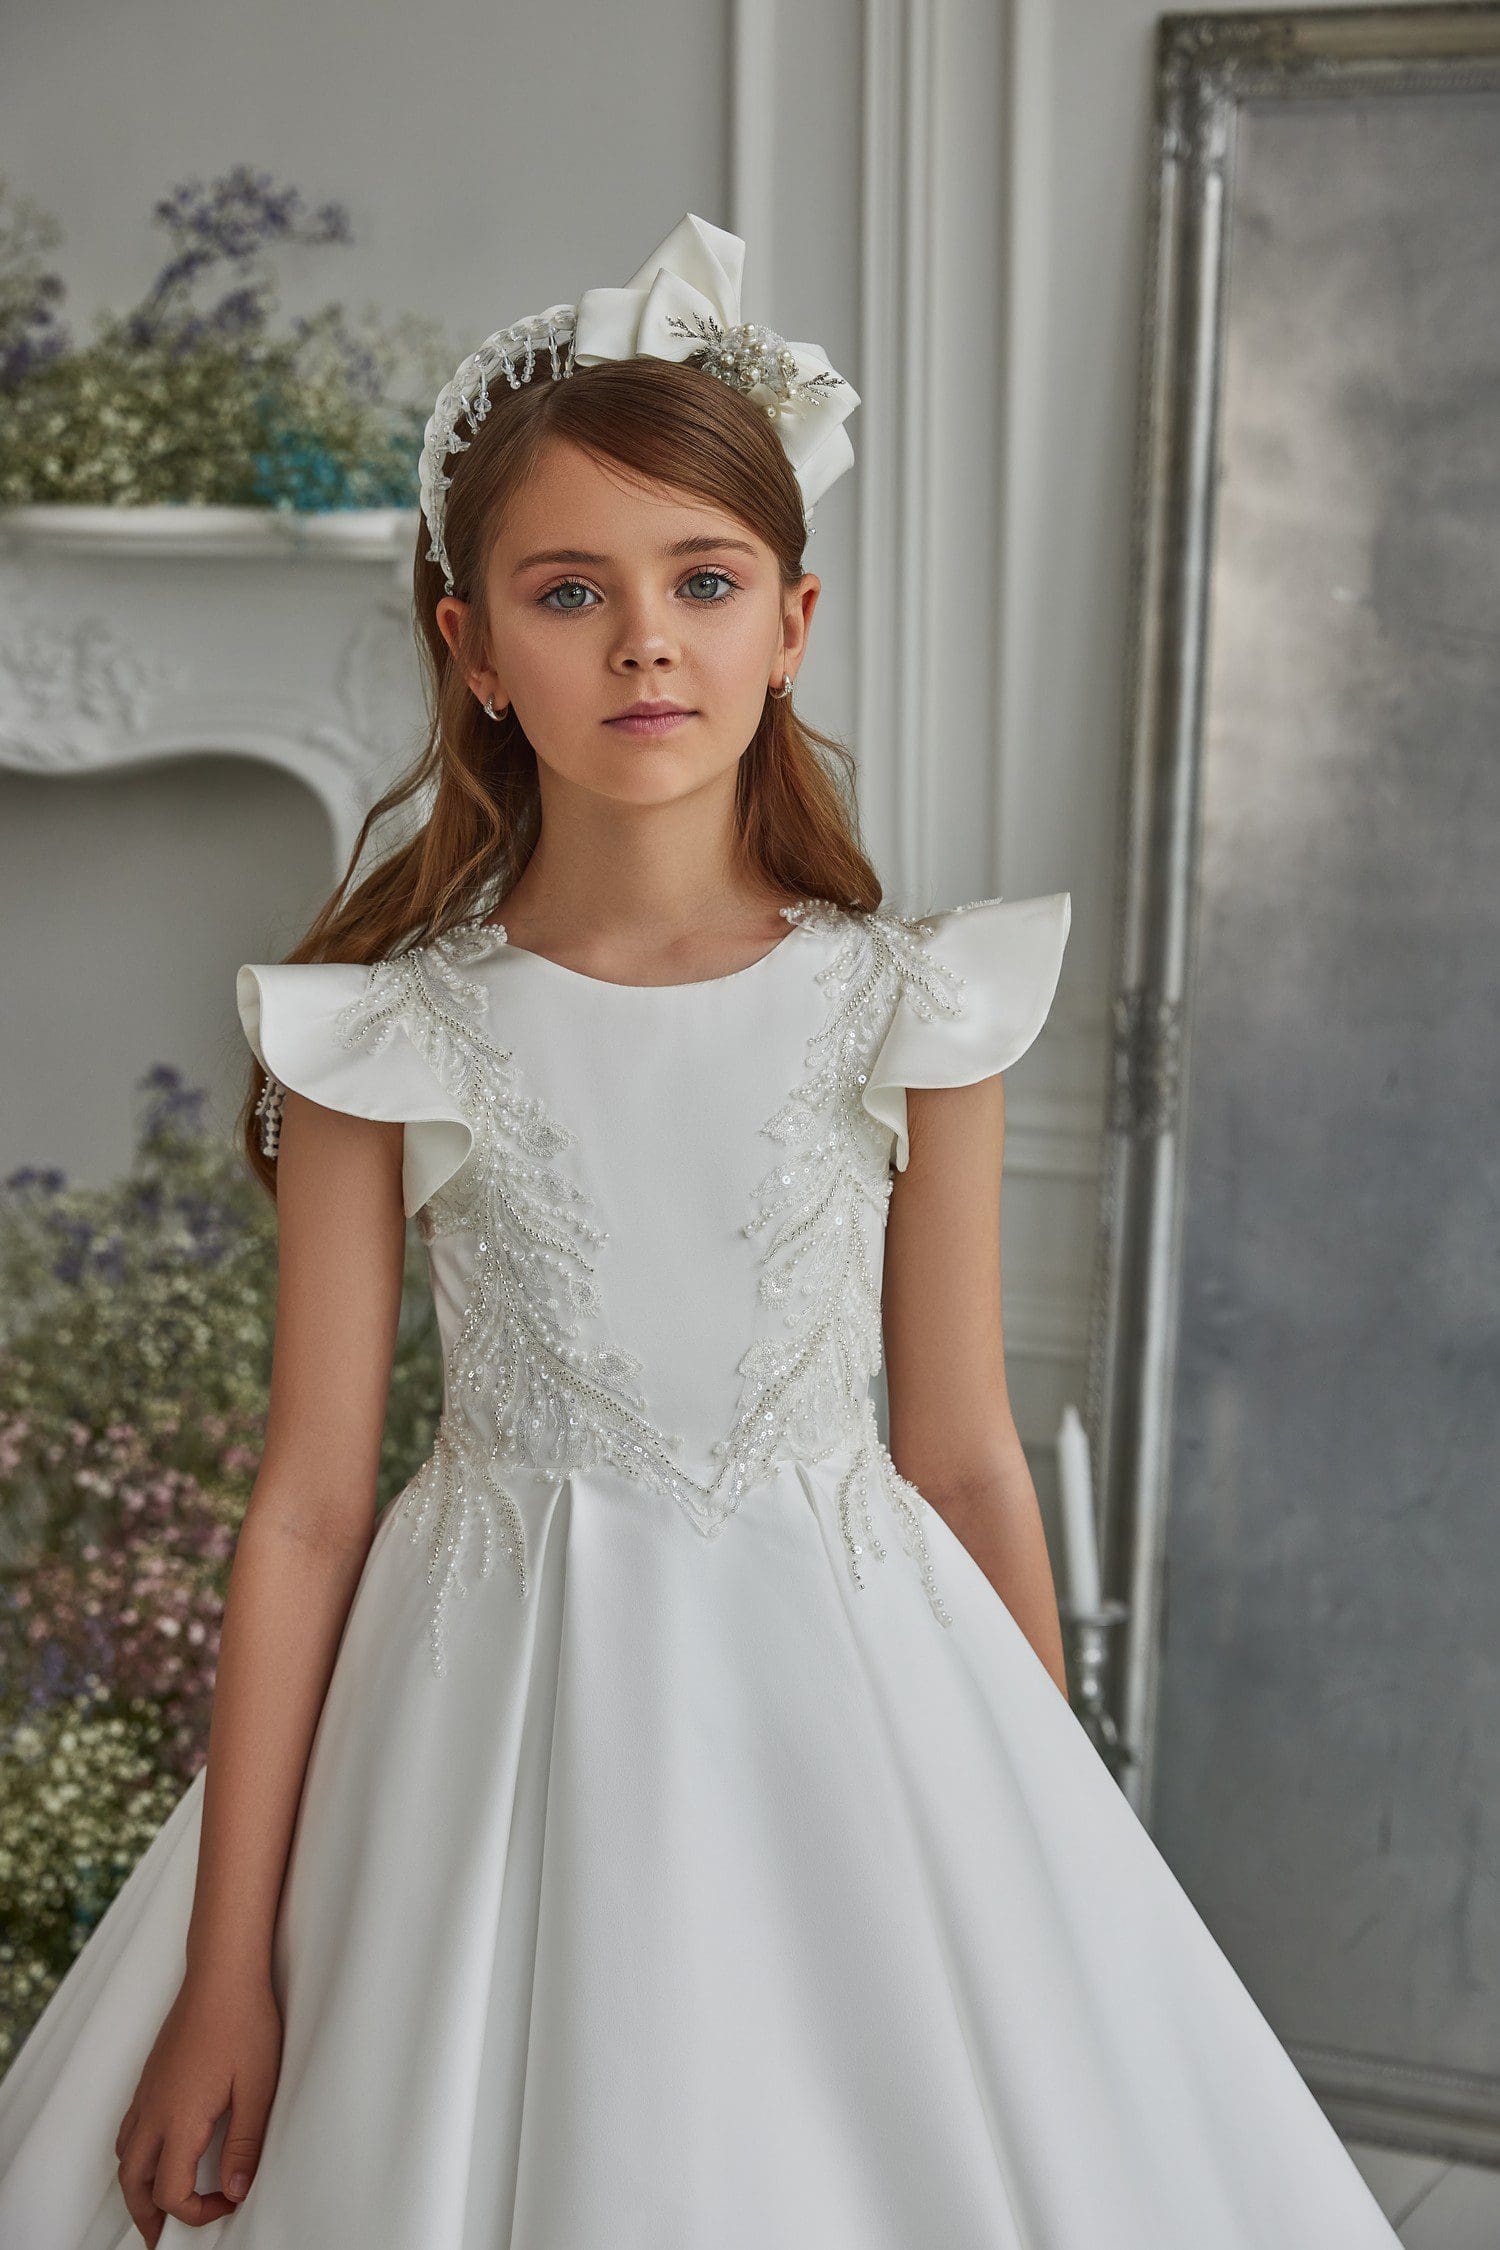 Girls Exclusive Dresses For Holy Communion at Quinn Harper Children's Occasion Wear in the UK